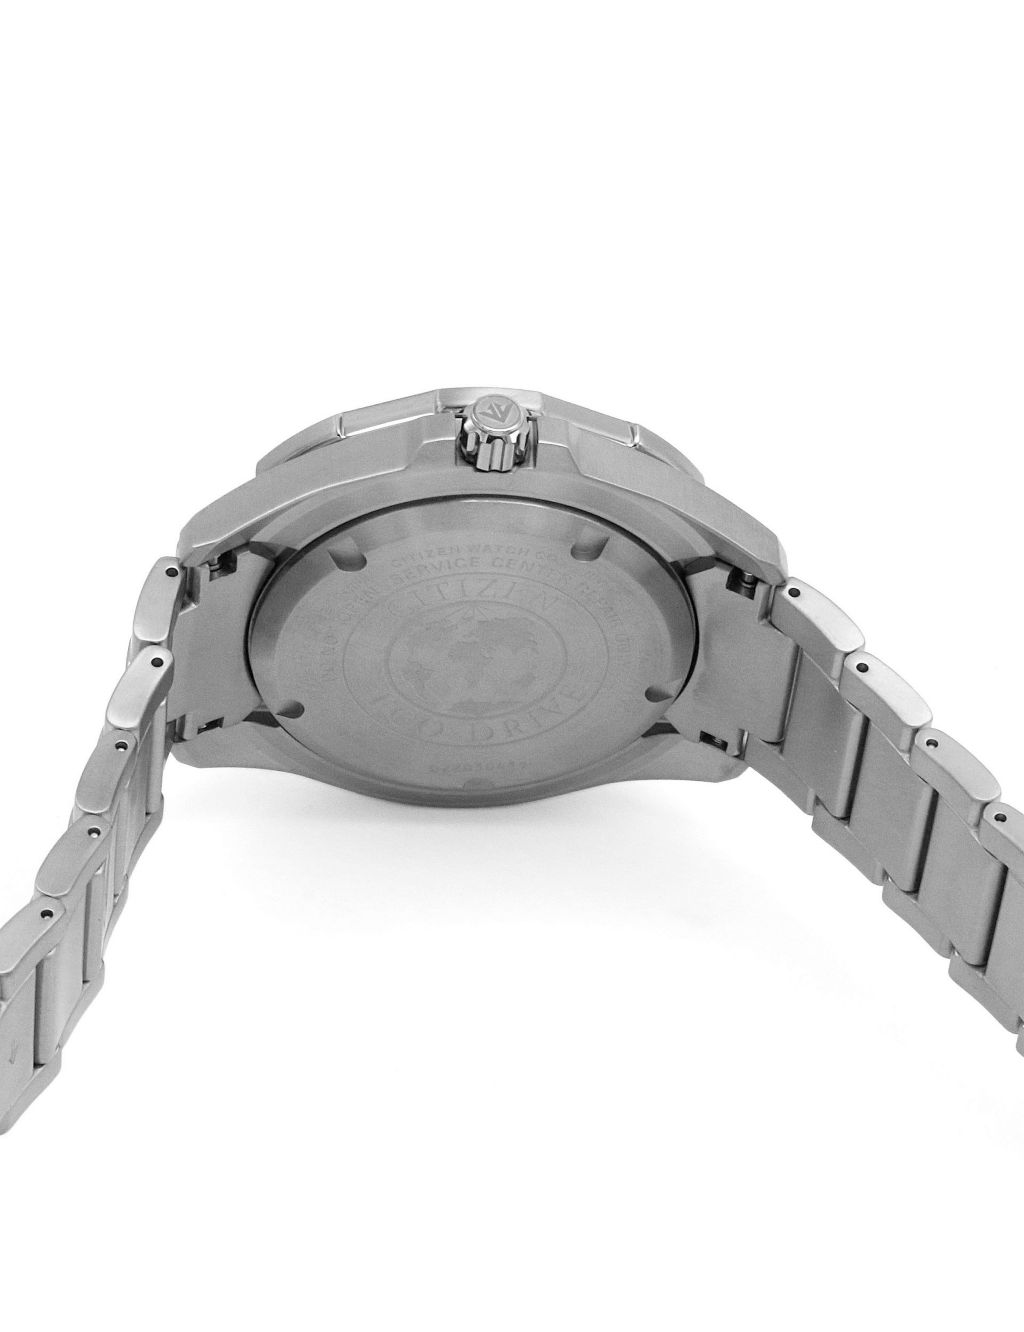 Citizen Titanium Promaster Diver Eco-Drive Stainless Steel Watch image 3